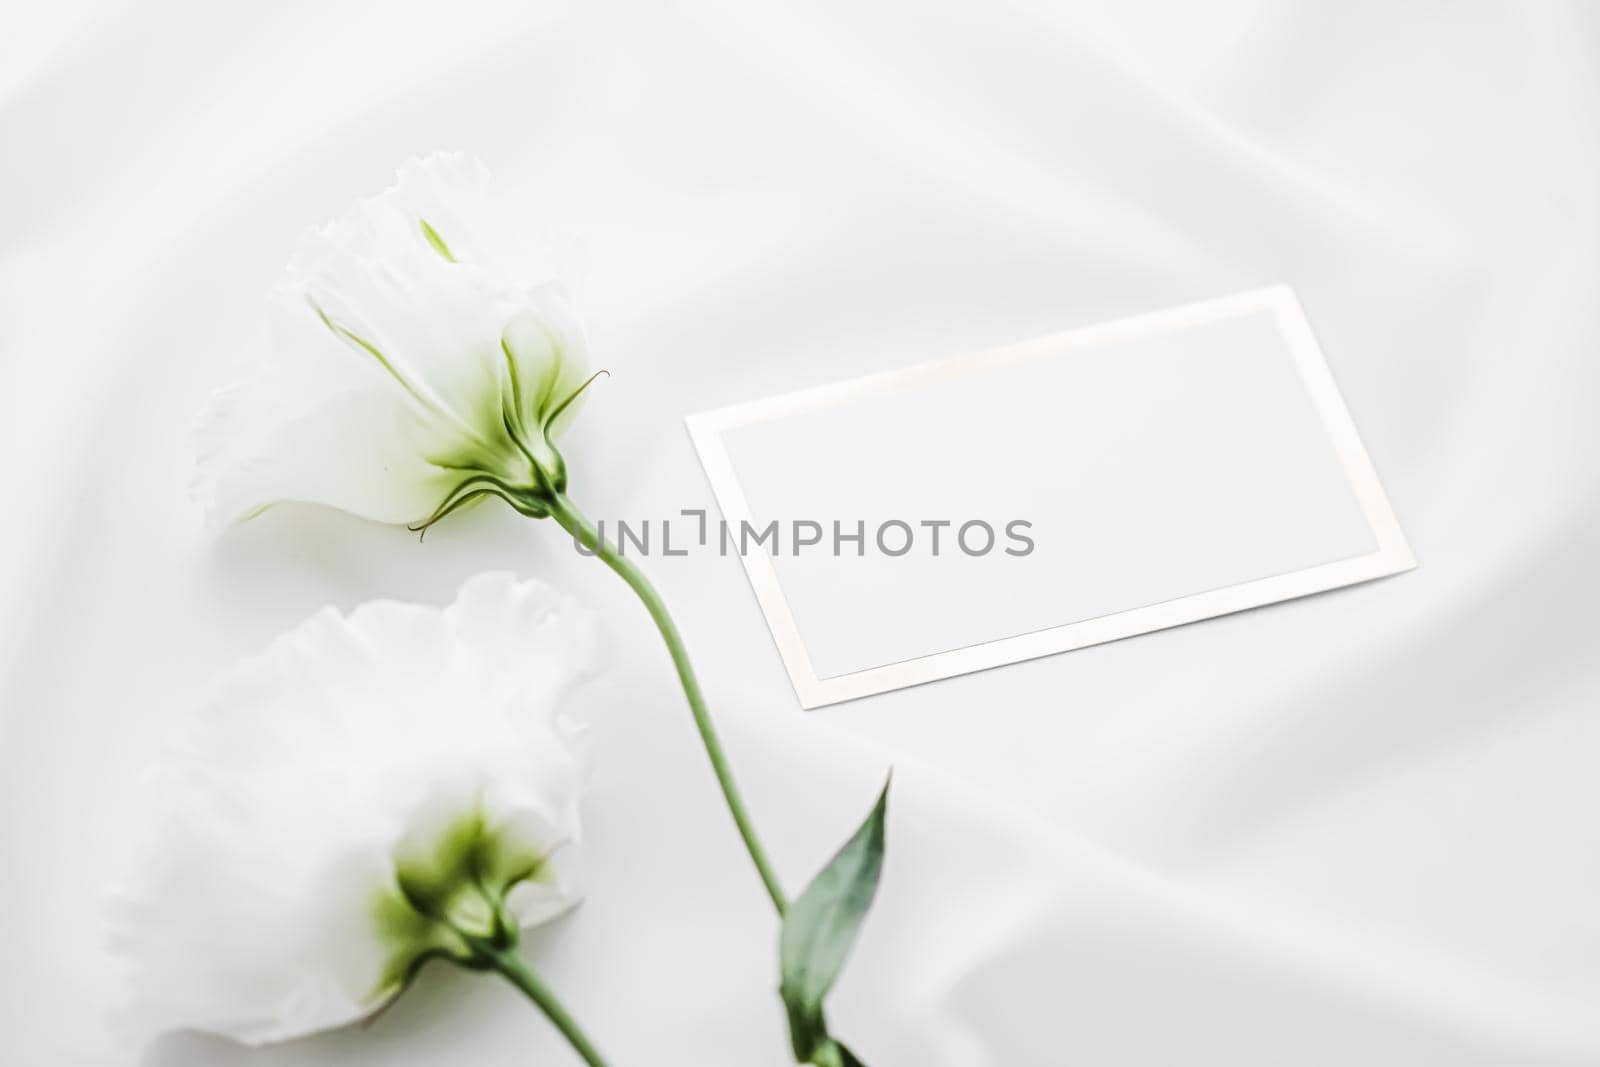 Wedding invitation or gift card and white rose flowers on silk fabric as bridal flatlay background, blank paper and holiday branding, flat lay design concept